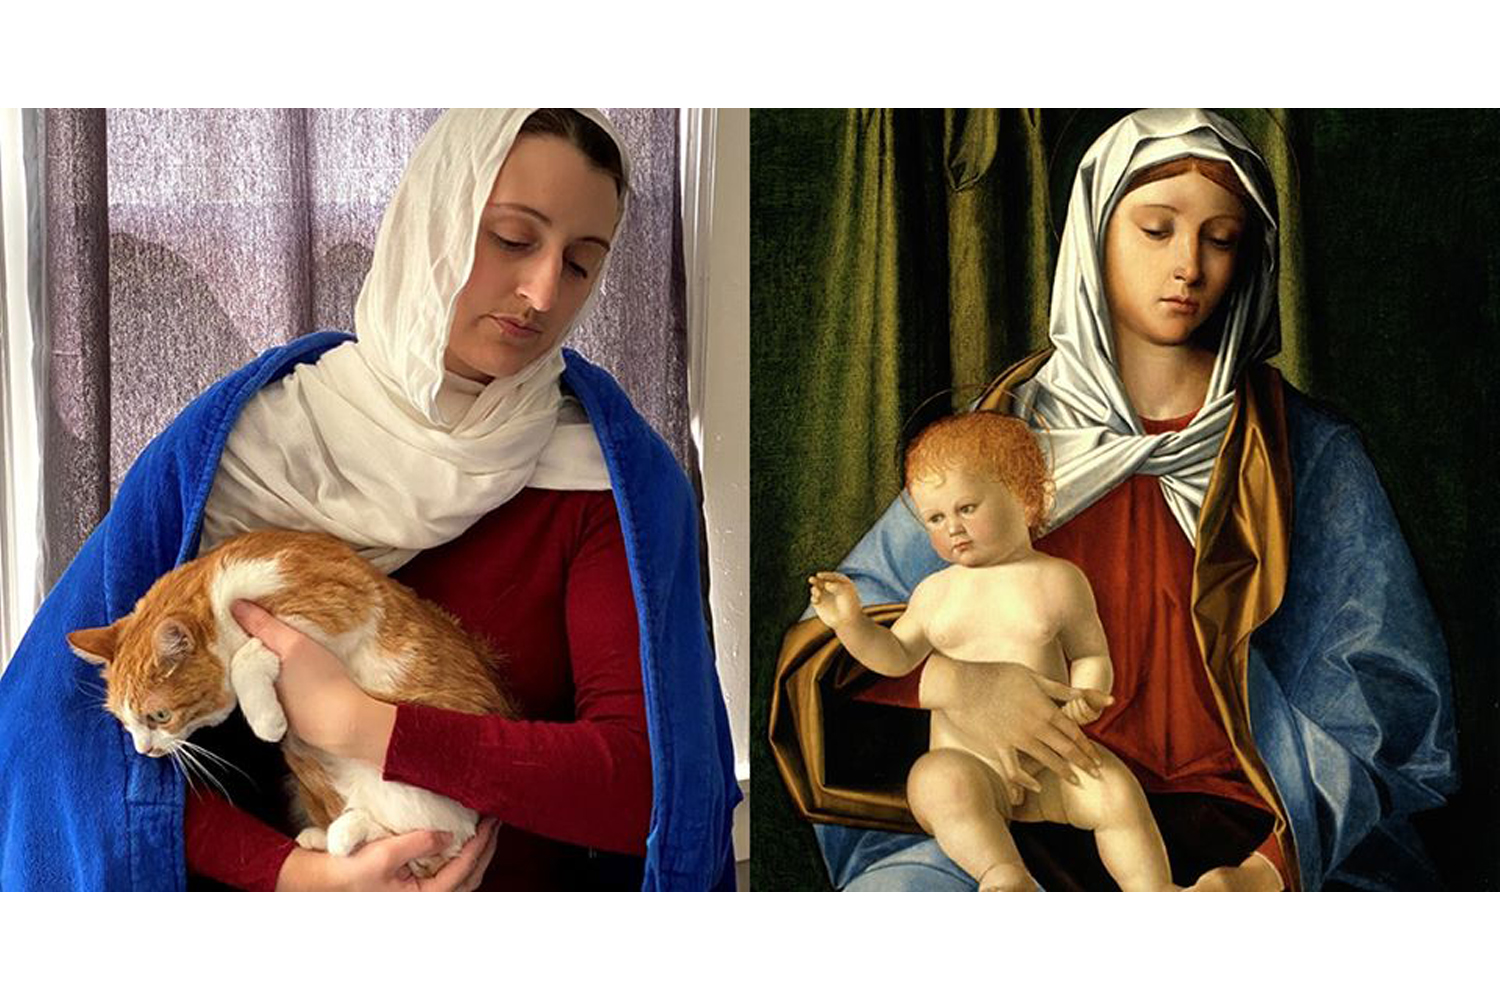 (Right) Nicolò Rondinelli (Italian, 1440-1520), Madonna and Child, about 1500, tempera and oil on panel, 30 x 23-1/8 in. Indianapolis Museum of Art at Newfields, James E. Roberts Fund, 24.6. (Left) Created by Lauren Lucchesi, Newfields